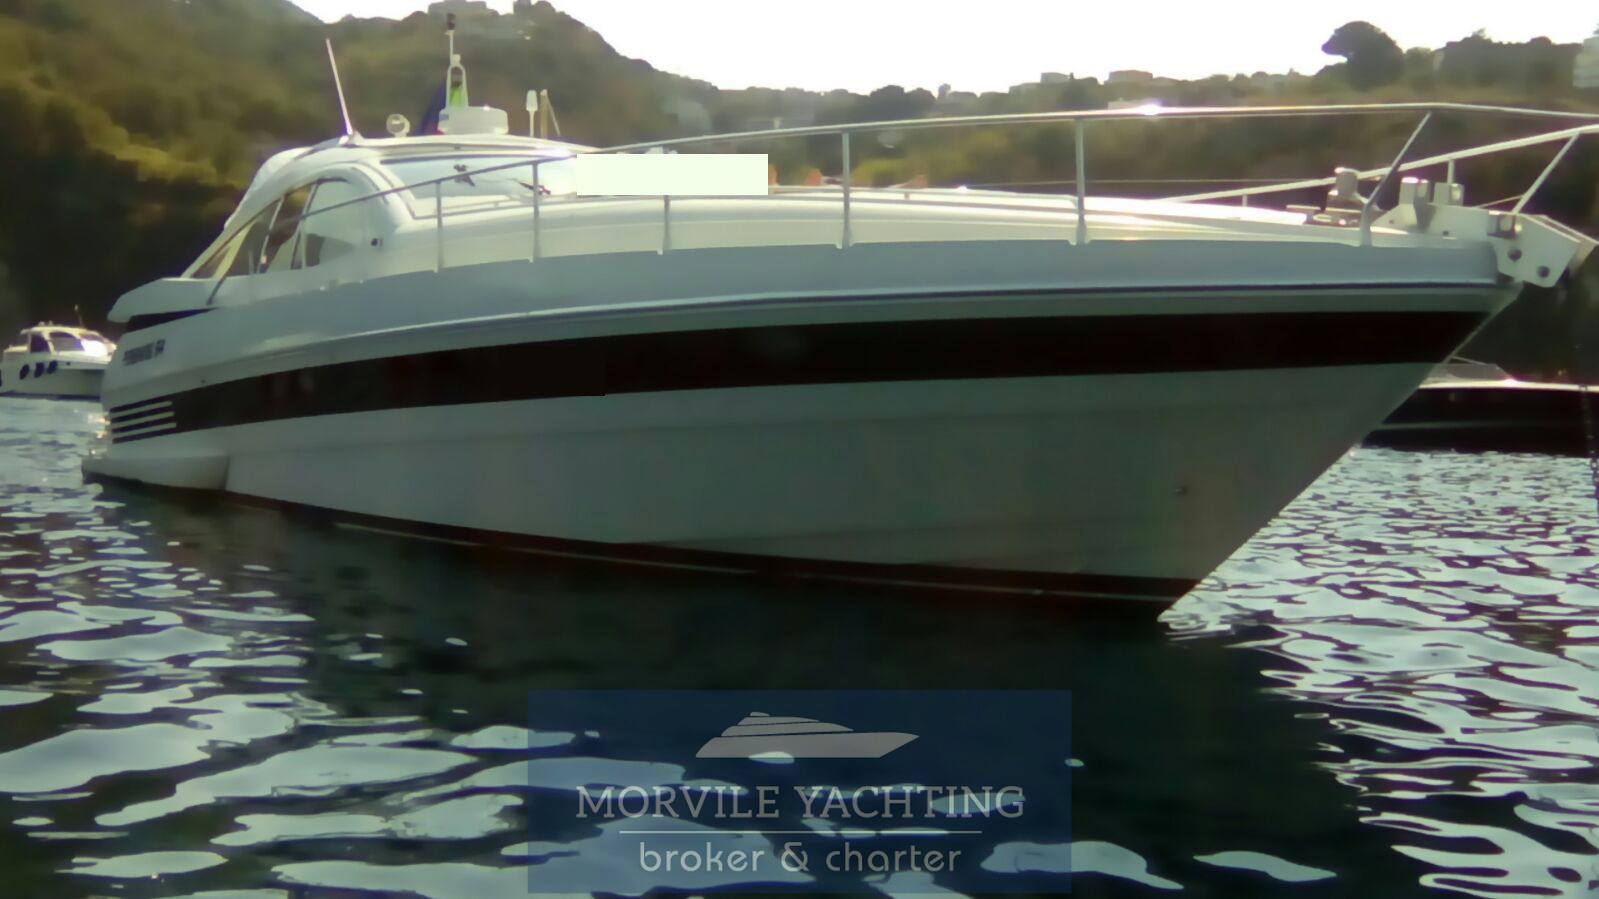 PERSHING 54 Motor boat used for sale